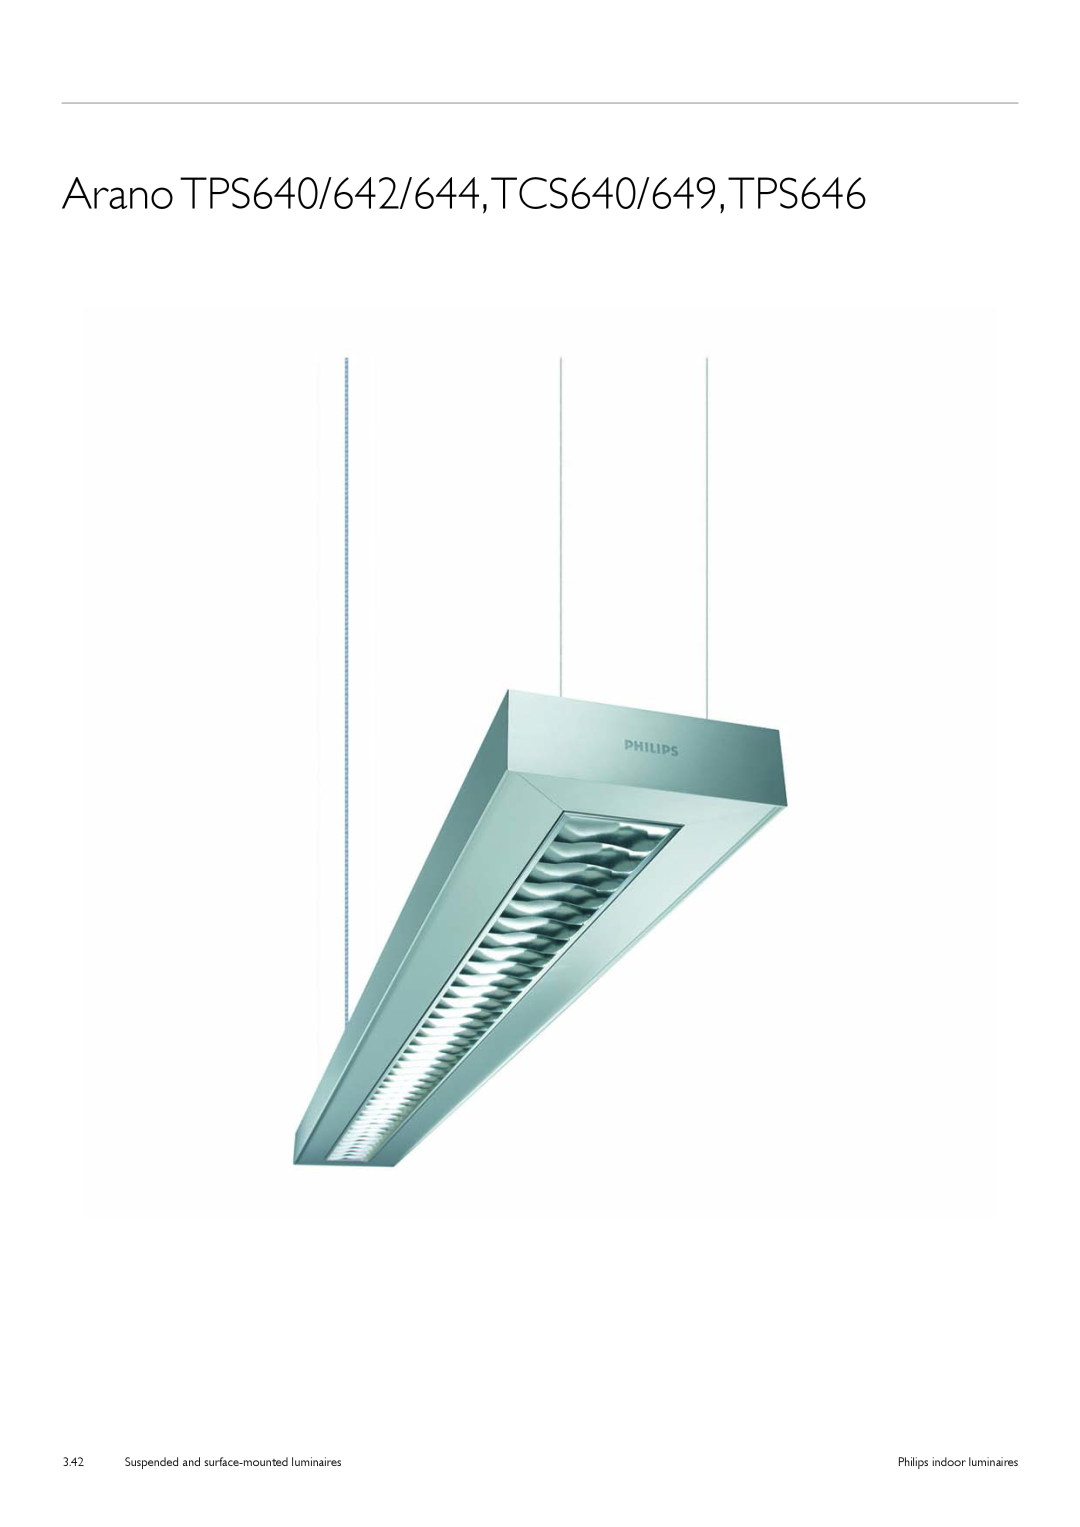 Philips TCS125 manual Arano TPS640/642/644,TCS640/649,TPS646, Suspended and surface-mountedluminaires, 3.42 